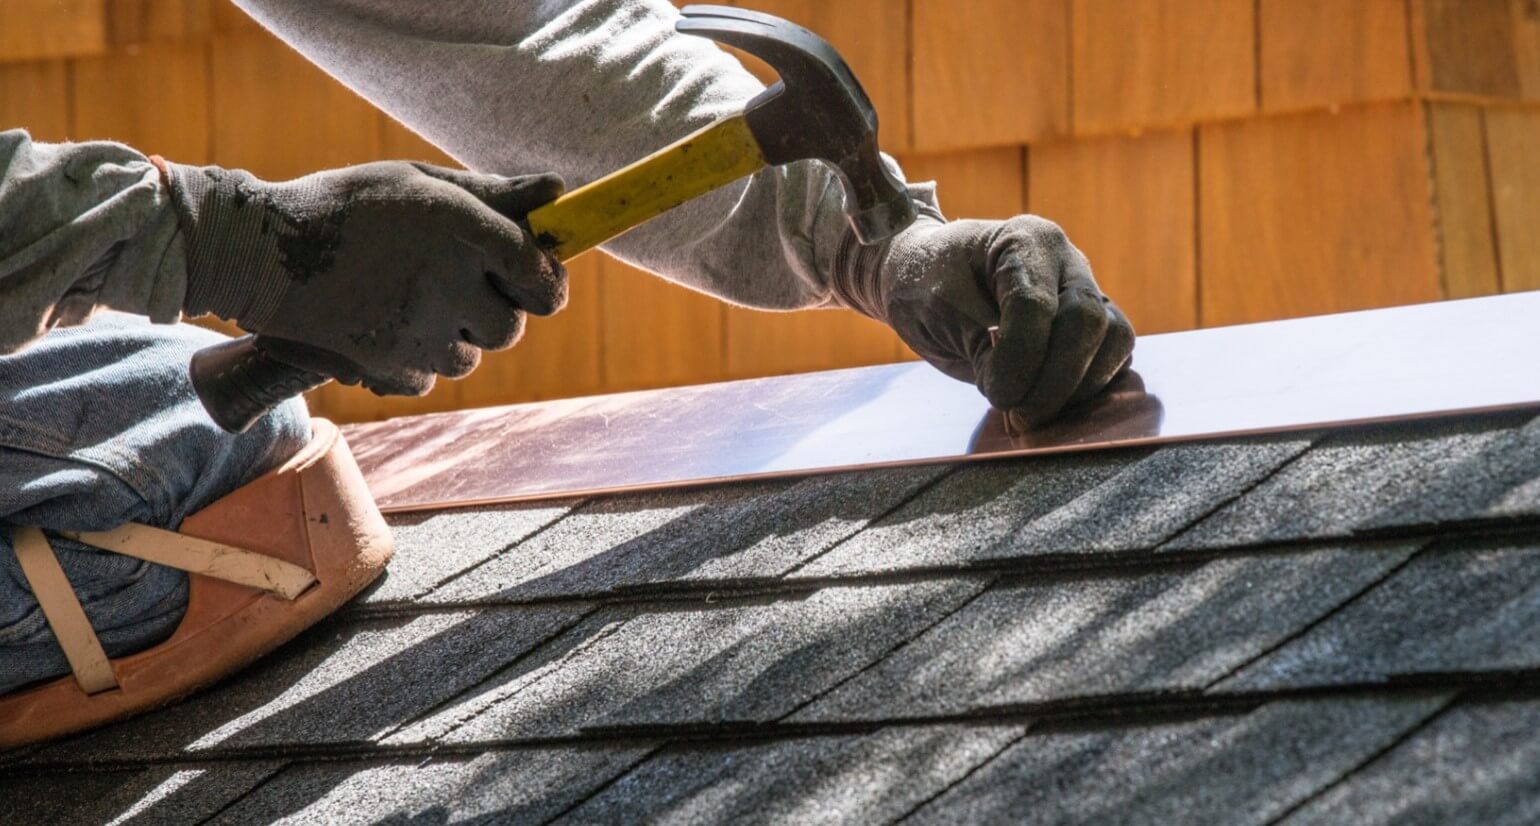 Residential Roofing Maintenance